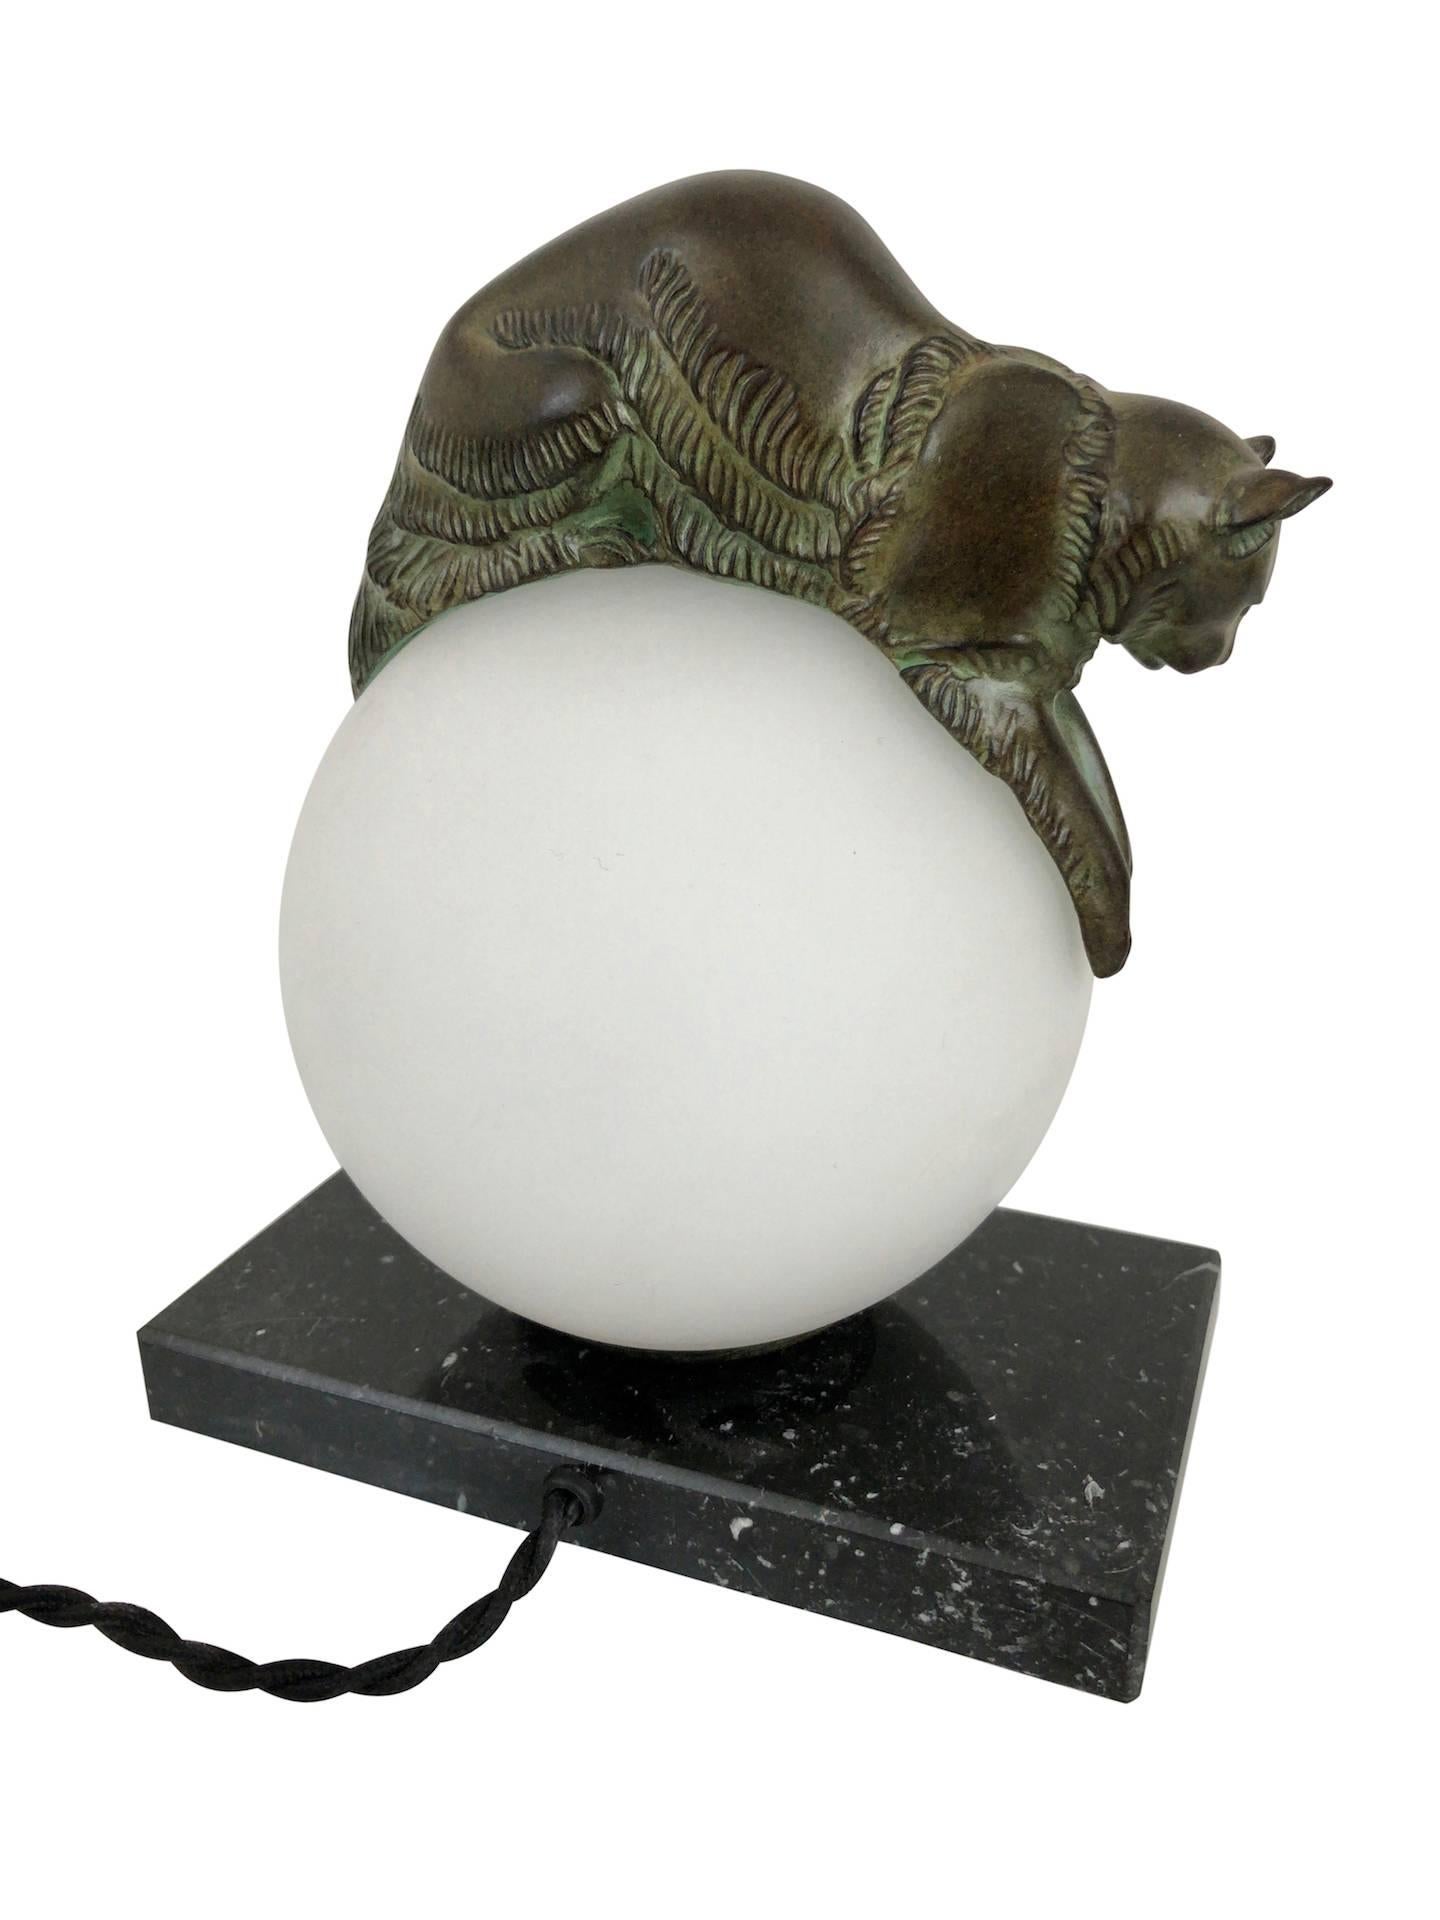 French Table Lamp Equilibre a Cat on a Glass Ball by Gaillard for Max Le Verrier 1